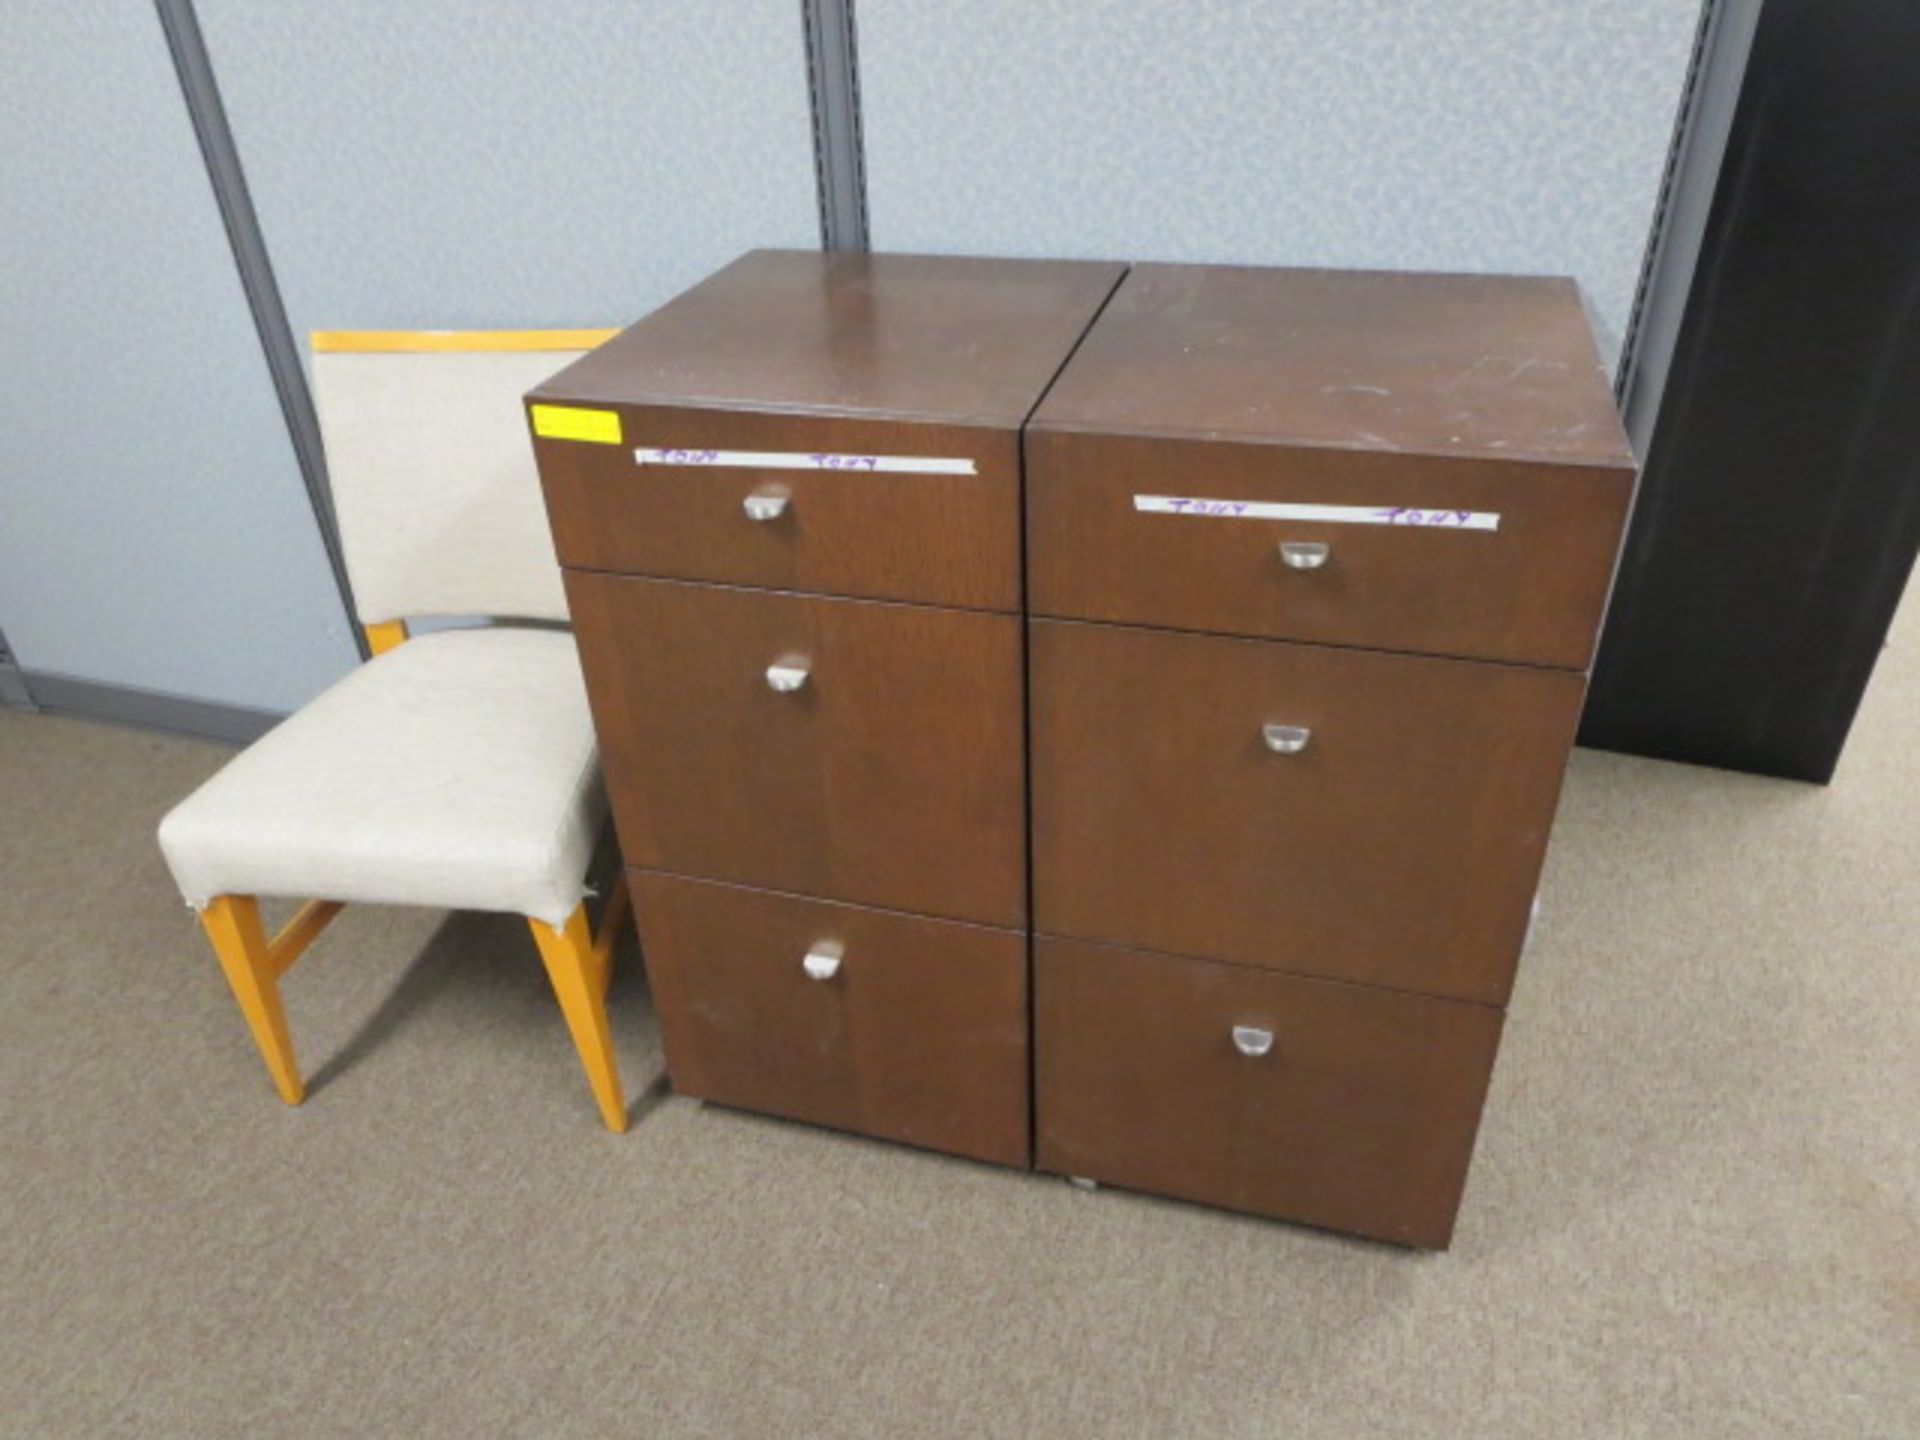 Lot of Credenza, Cabinets, Chairs, Steamer, Ironing Boards, Coffee Table - Image 2 of 3